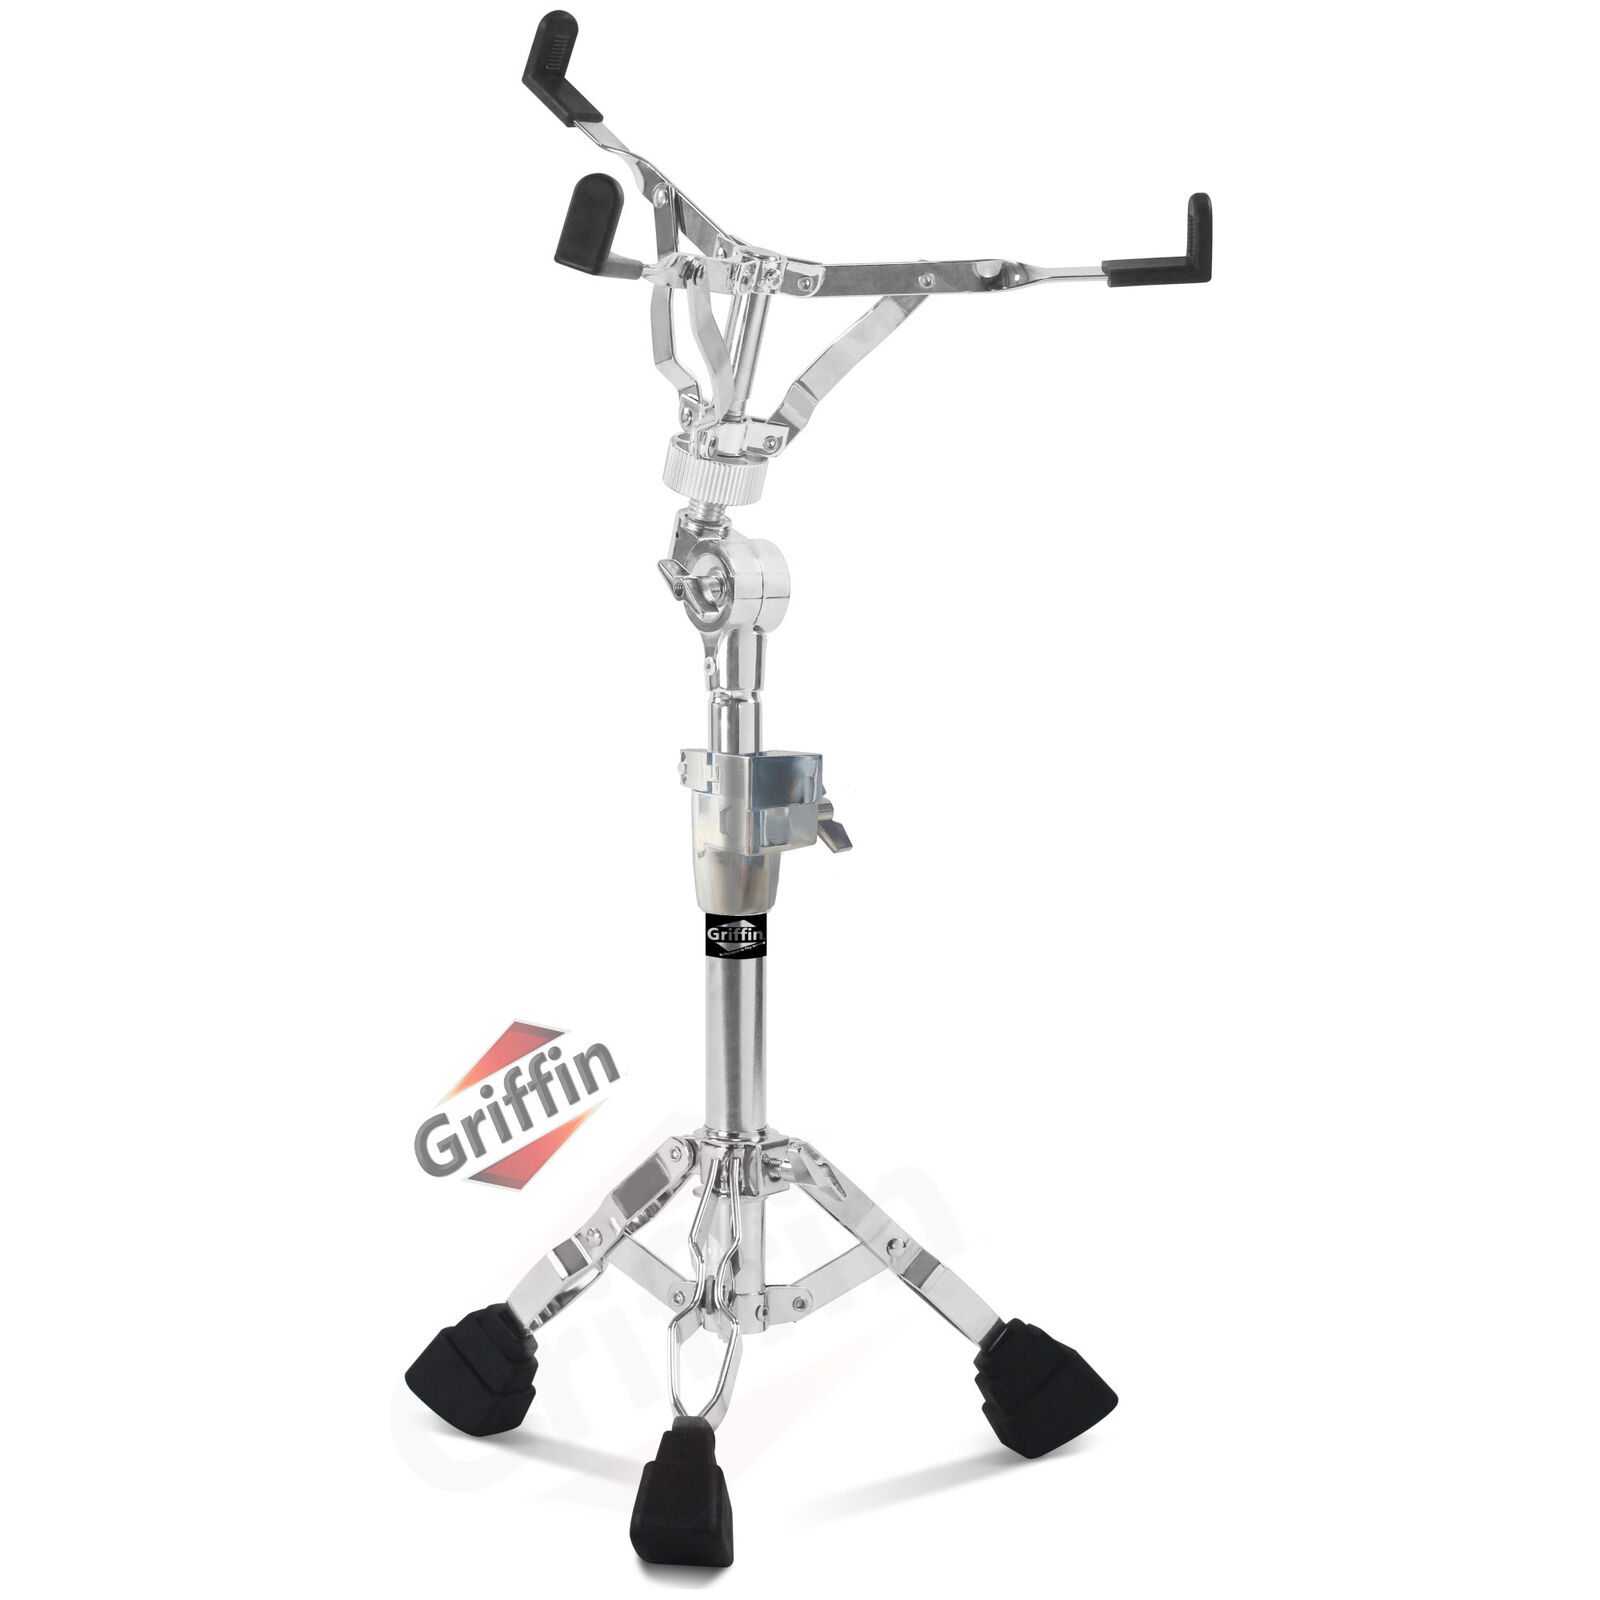 GRIFFIN Snare Drum Stand - Premium Percussion Hardware Tom Mount Pad Holder KIT